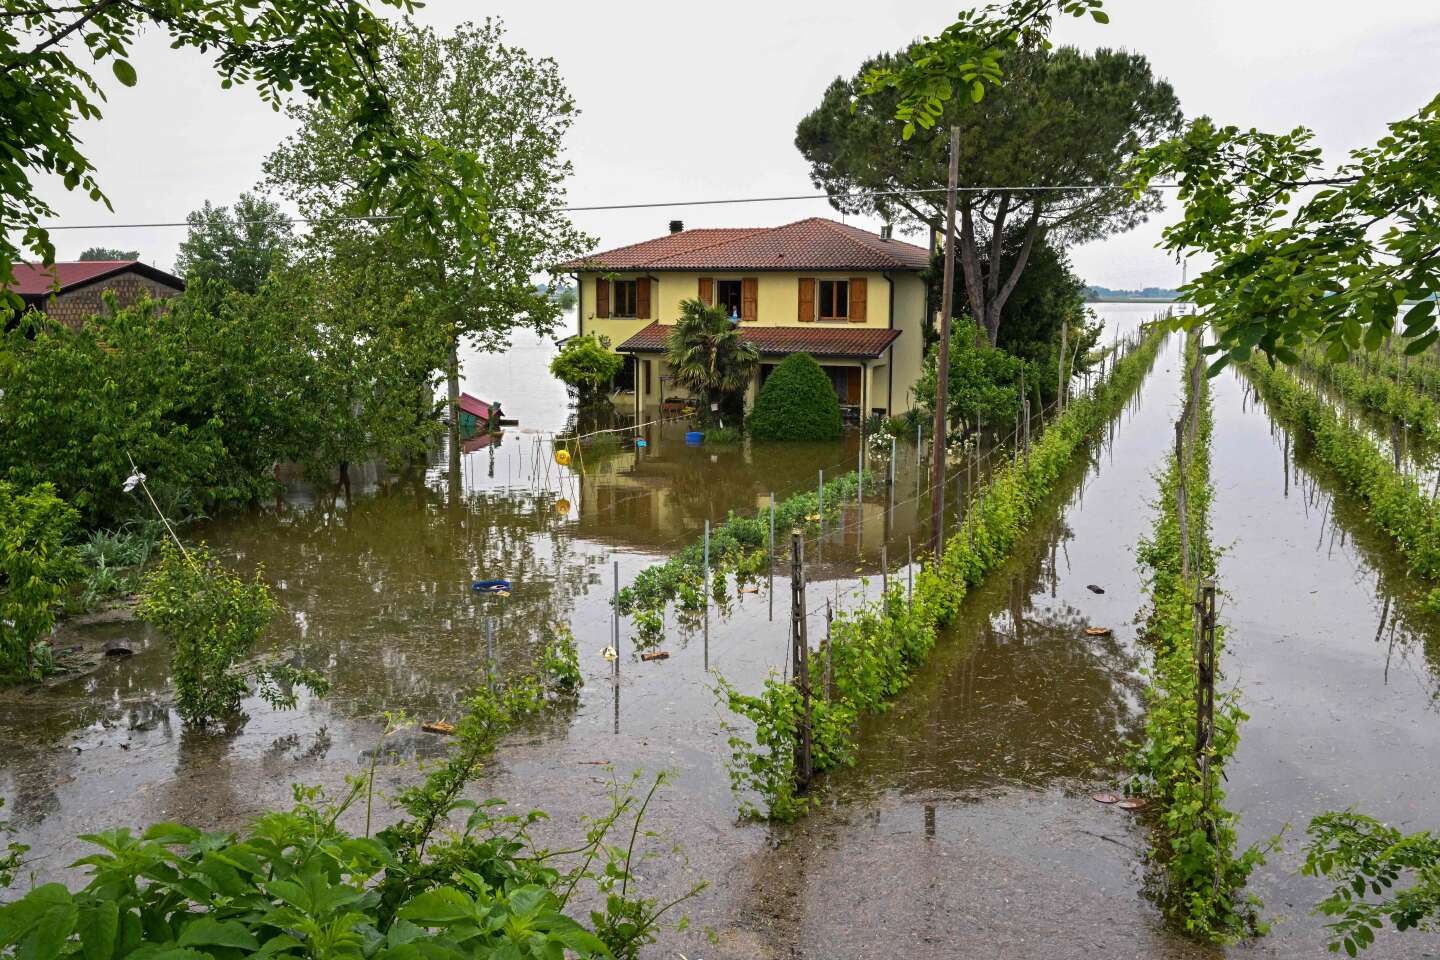 Italy&#039;s Emilia-Romagna region, devastated by floods, questions land use